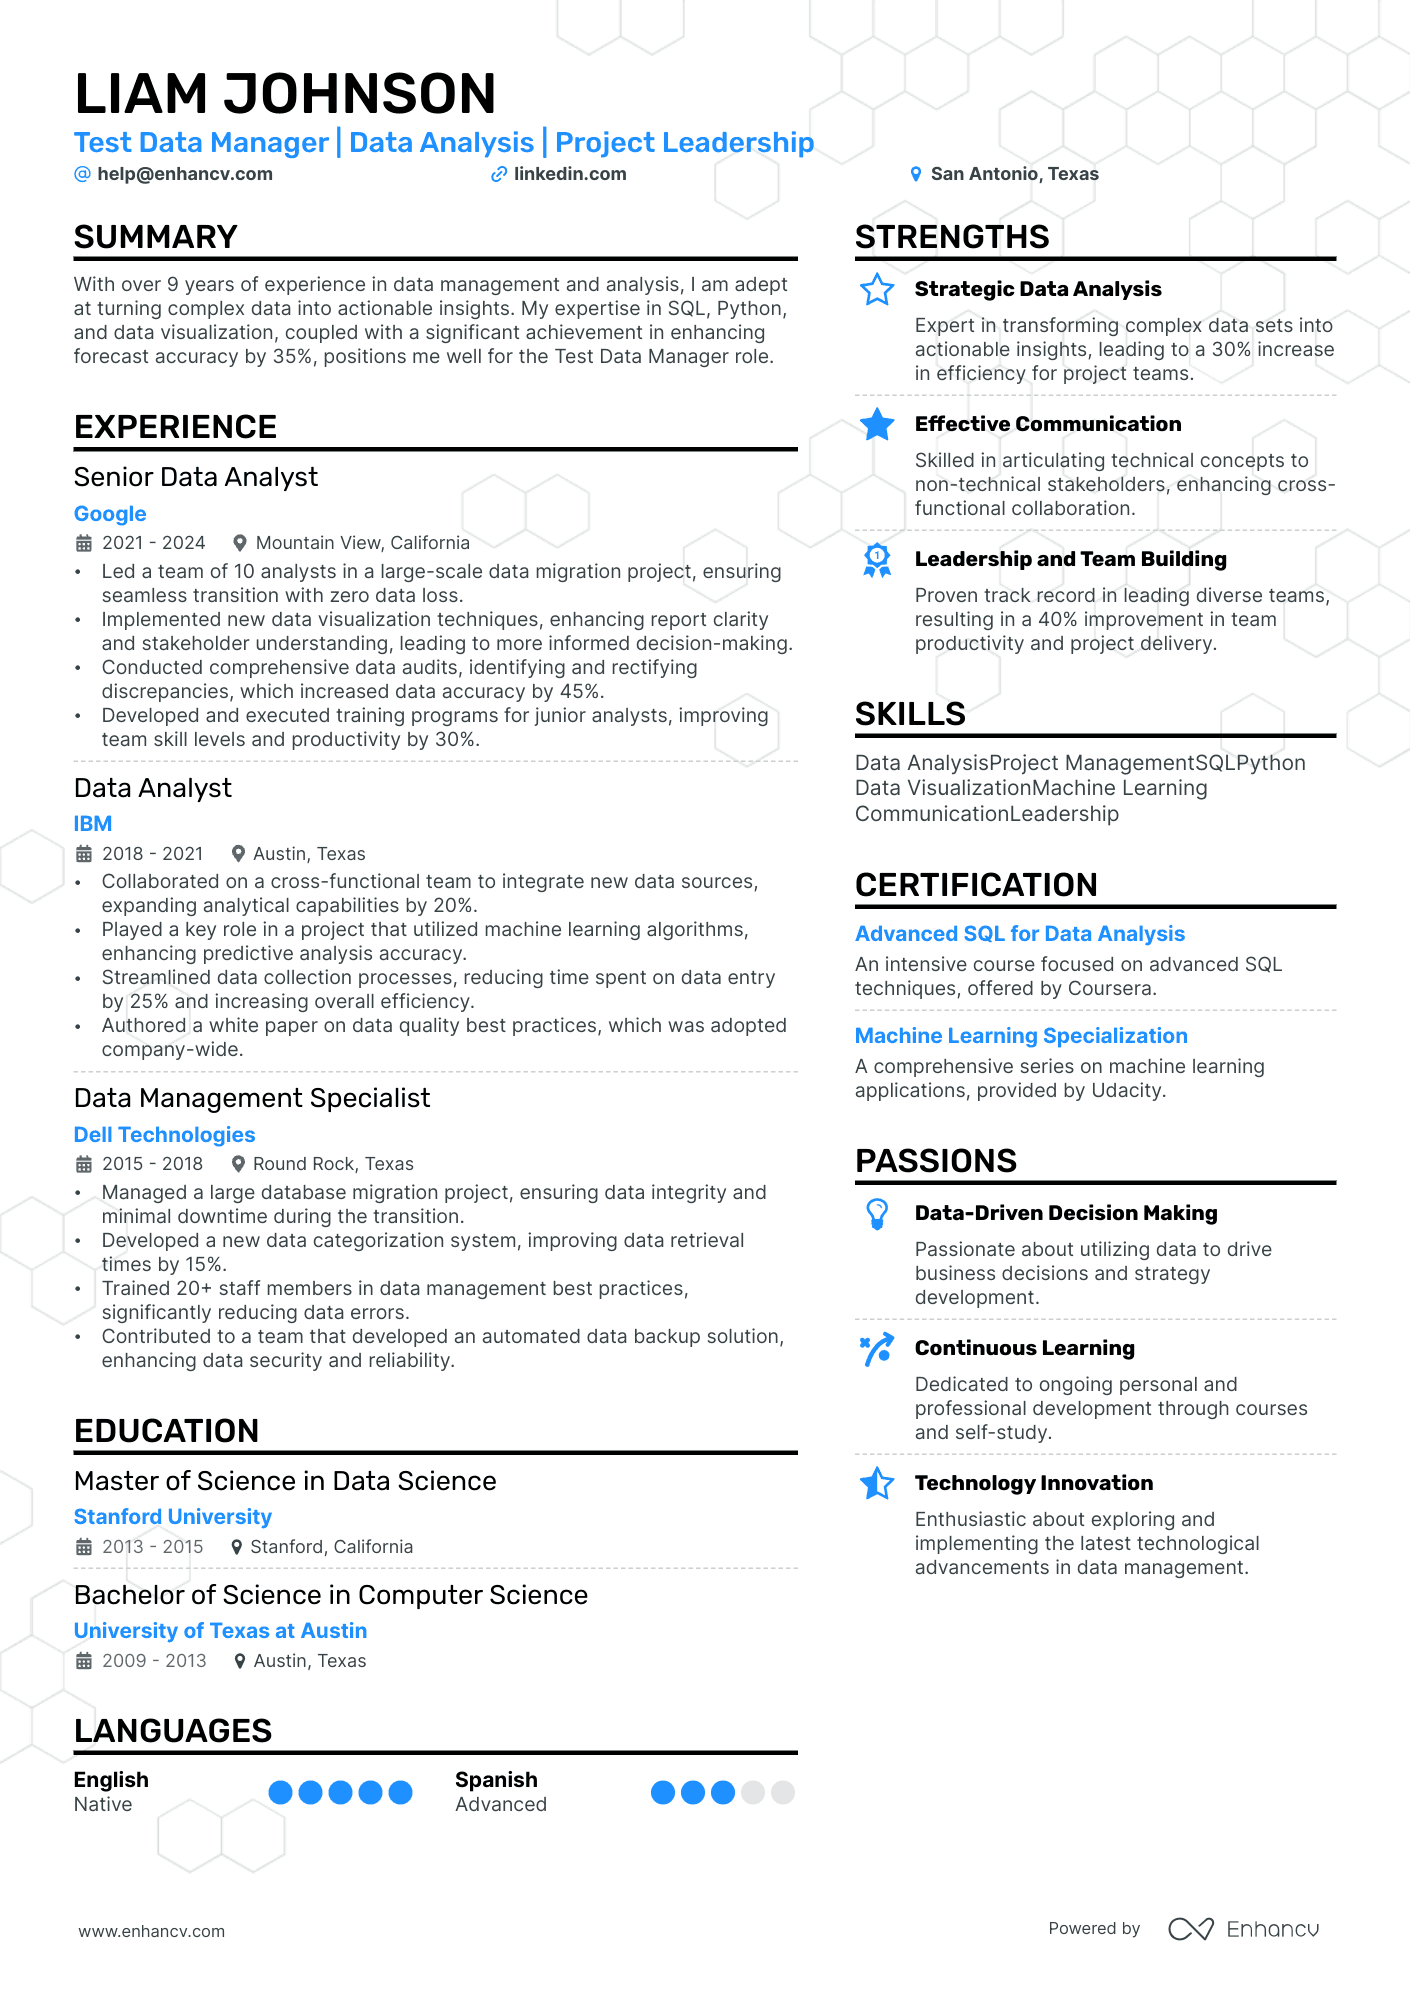 Test Data Manager | Data Analysis | Project Leadership resume example